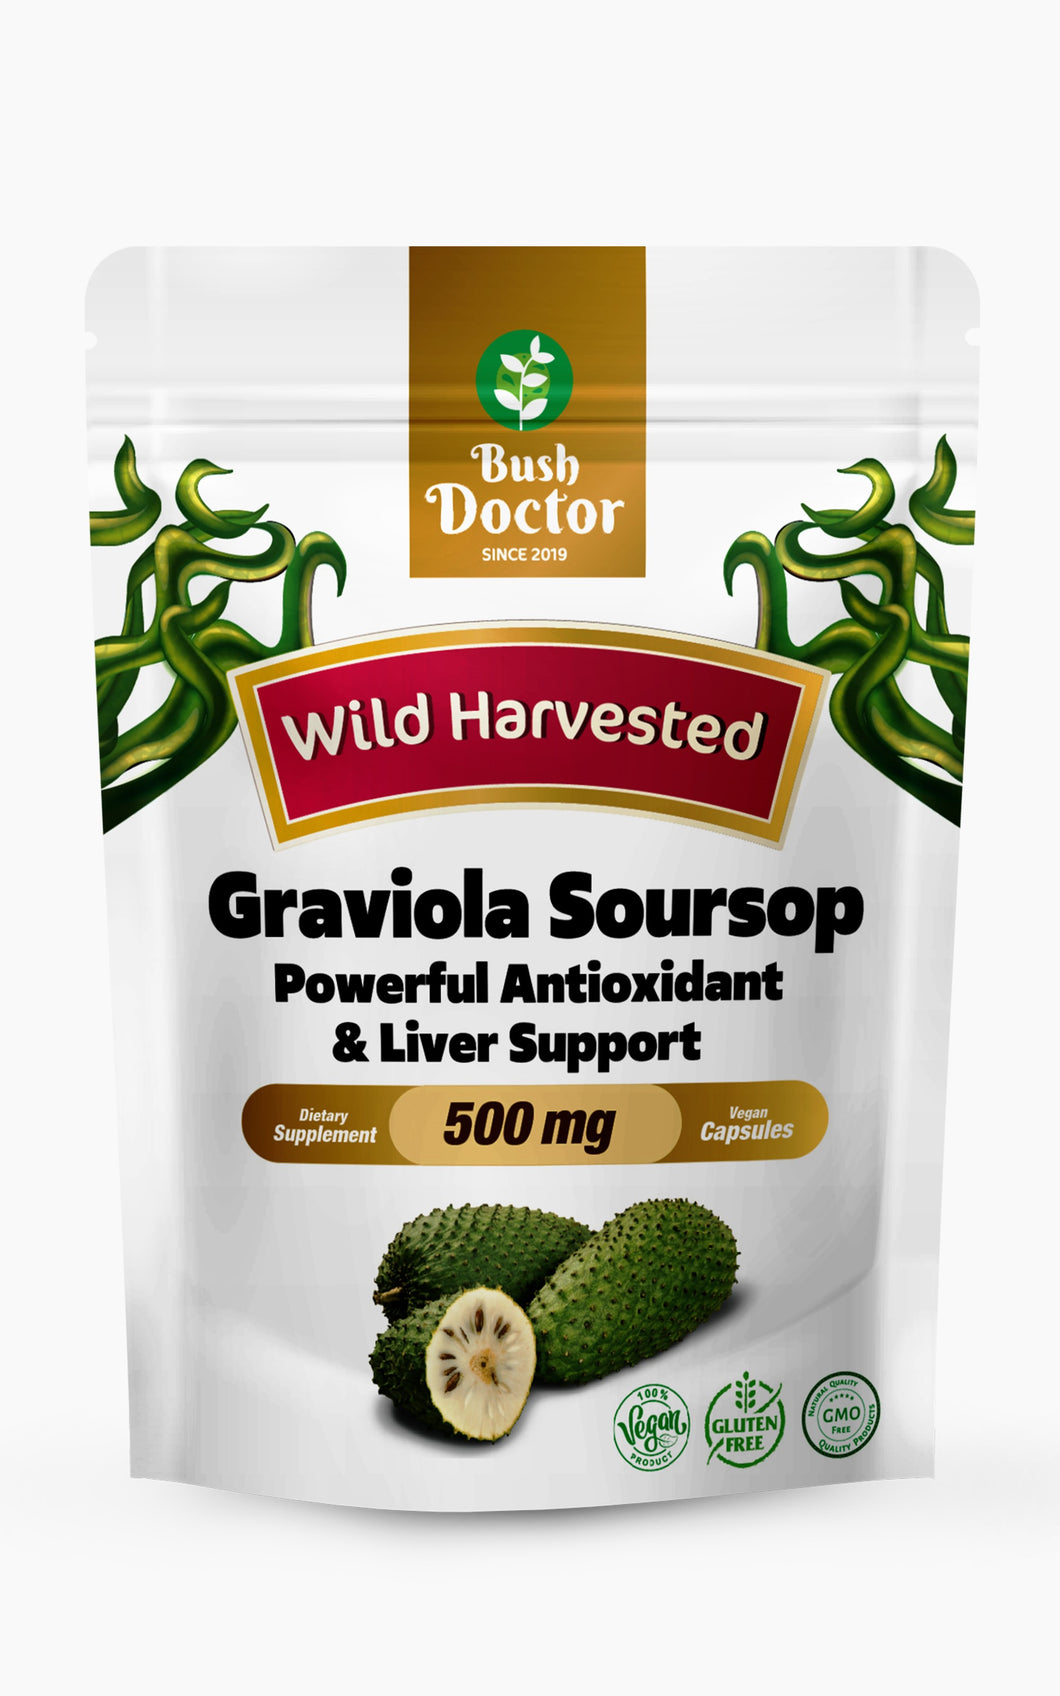 Rainforest Relief - Graviola Soursop 10,000mg Capsules Extract 20:1 Antioxidants, Liver Support